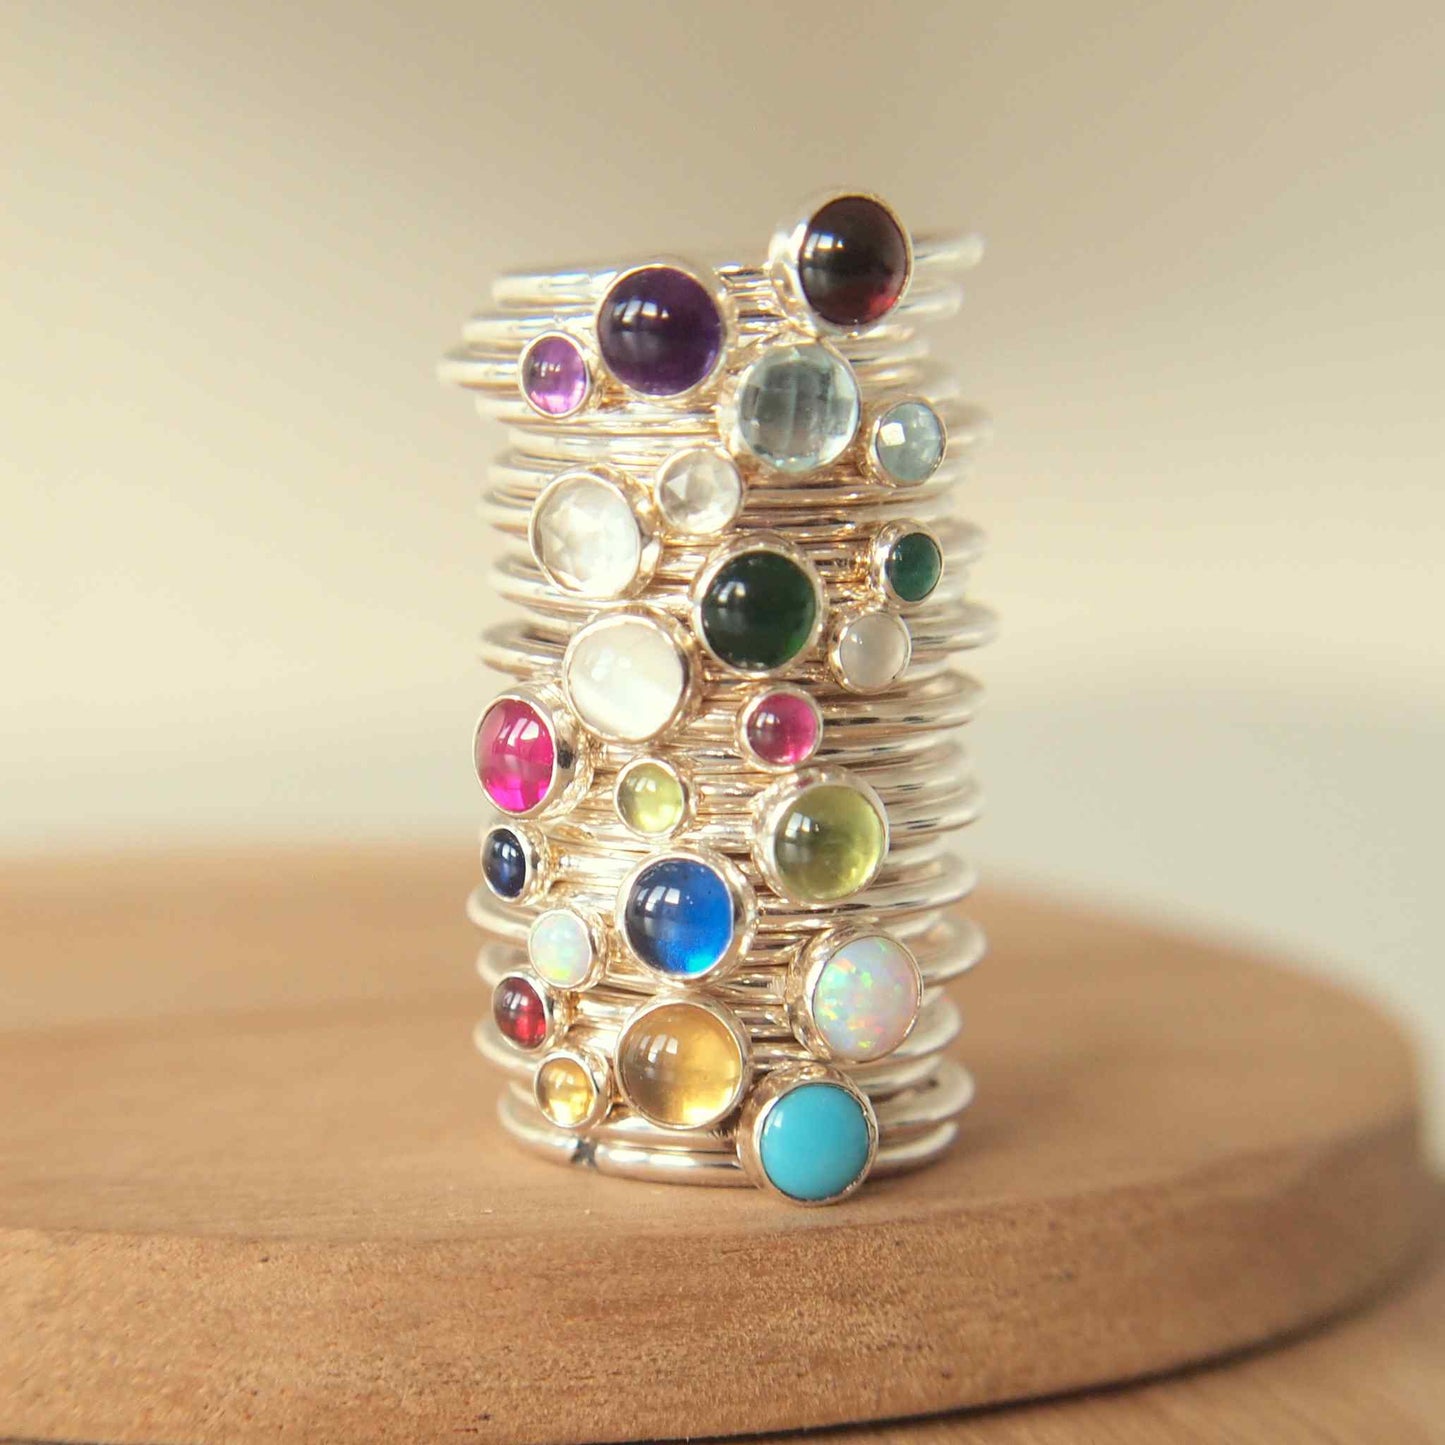 Stack of birthstone rings showing all birthstones in two sizes. Handmade by maram jewellery in Scotland